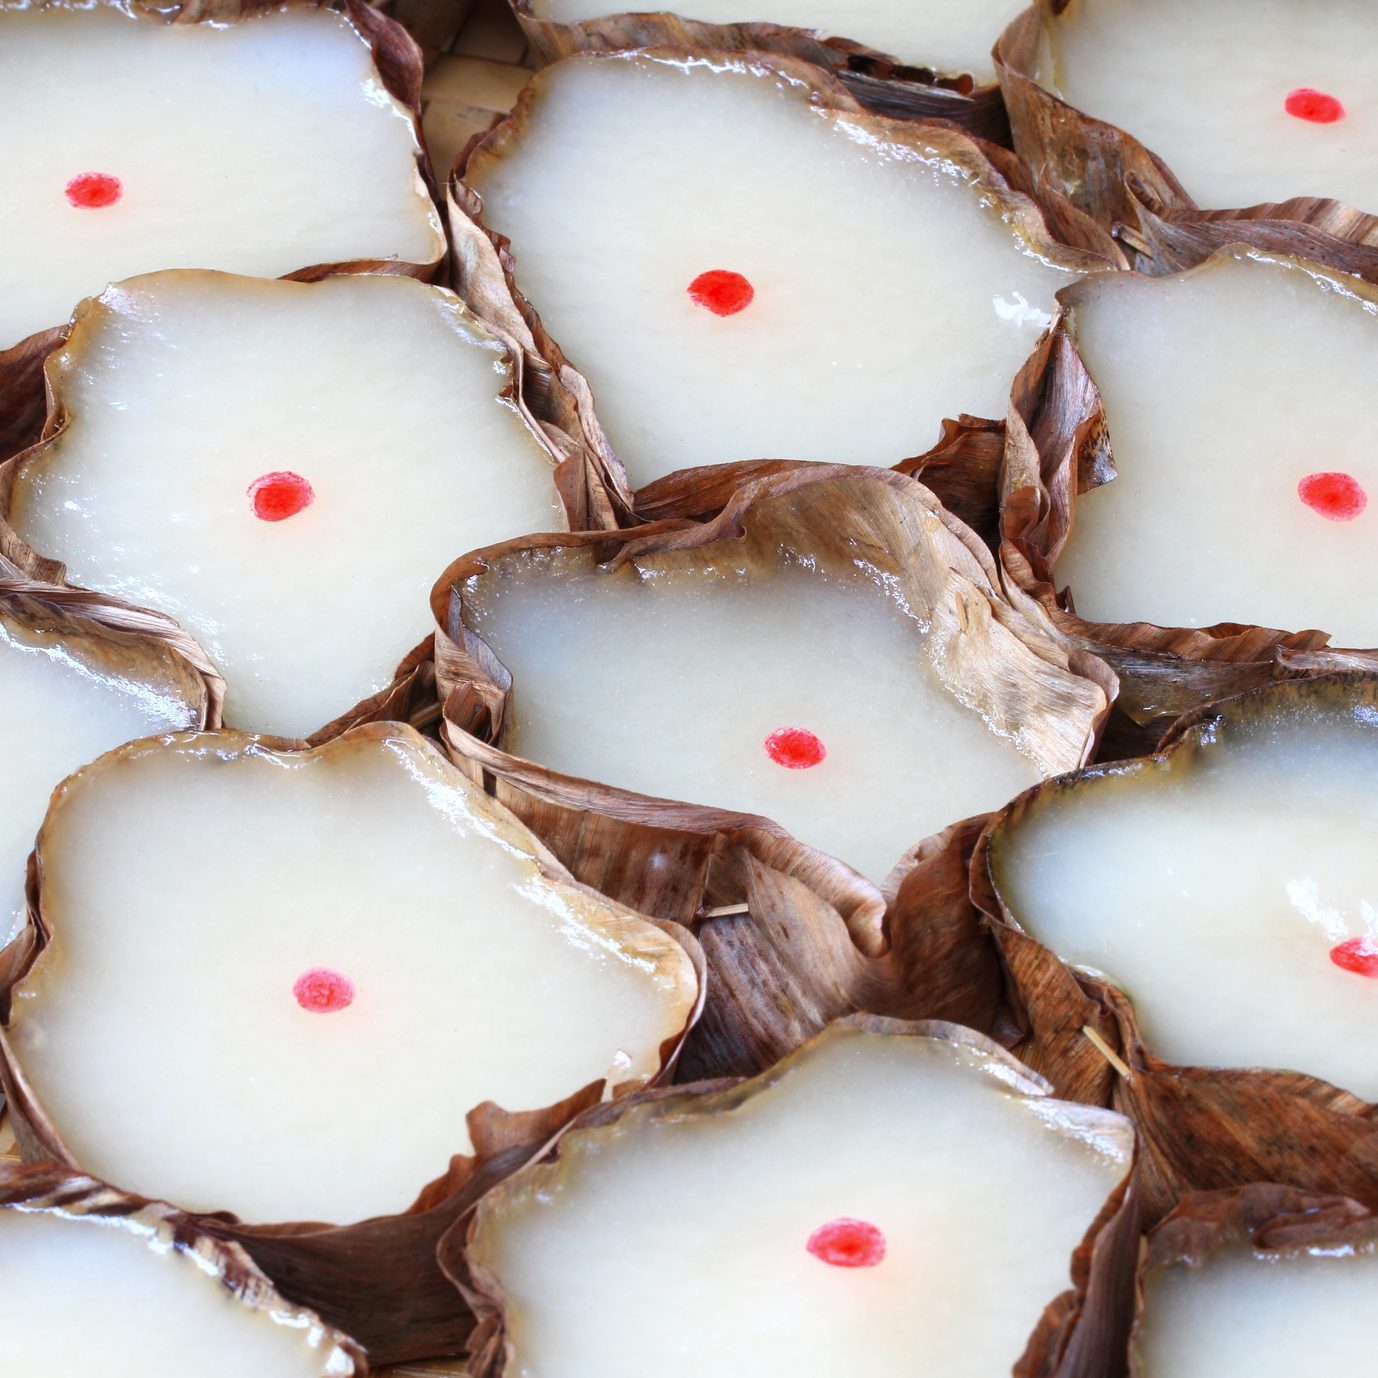 6 Traditional Chinese New Year Foods That Will Bring You Good Luck